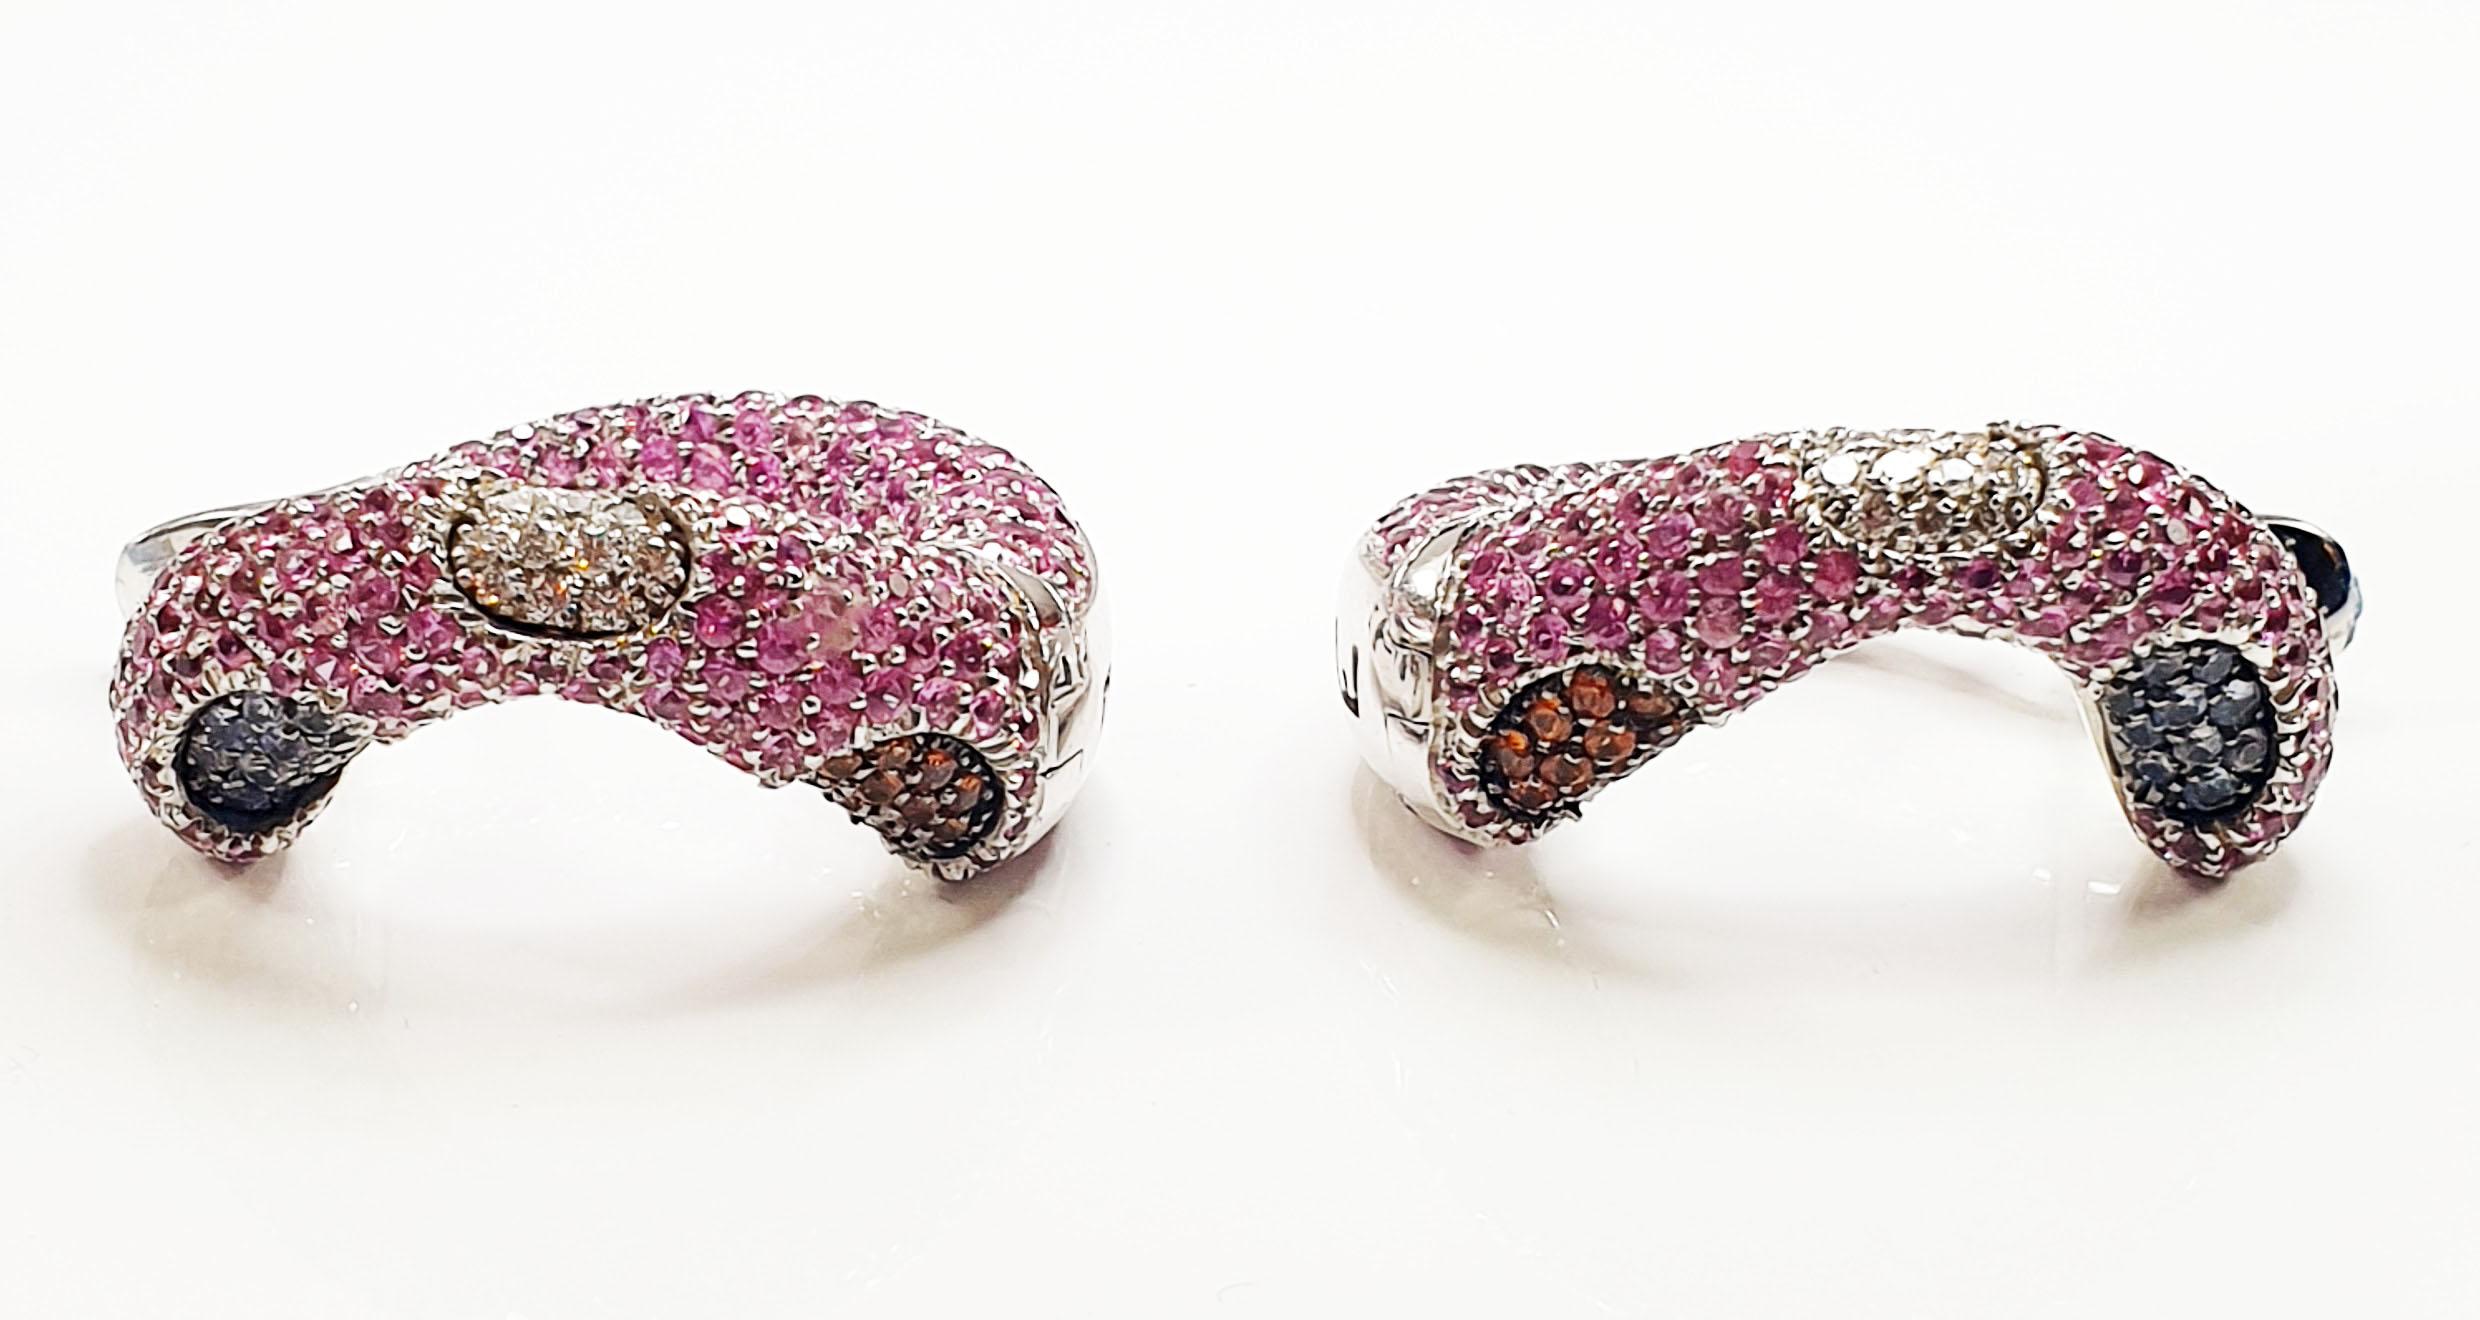 Valente Multicolored Sapphire and Diamonds Side Hoop 18kt Gold Earrings
Valente was founded in Milan in 1953 by Tranquillo Valente.   Valente jewelry is made with a precise craftsman’s expertise using precious gems and special materials, and it